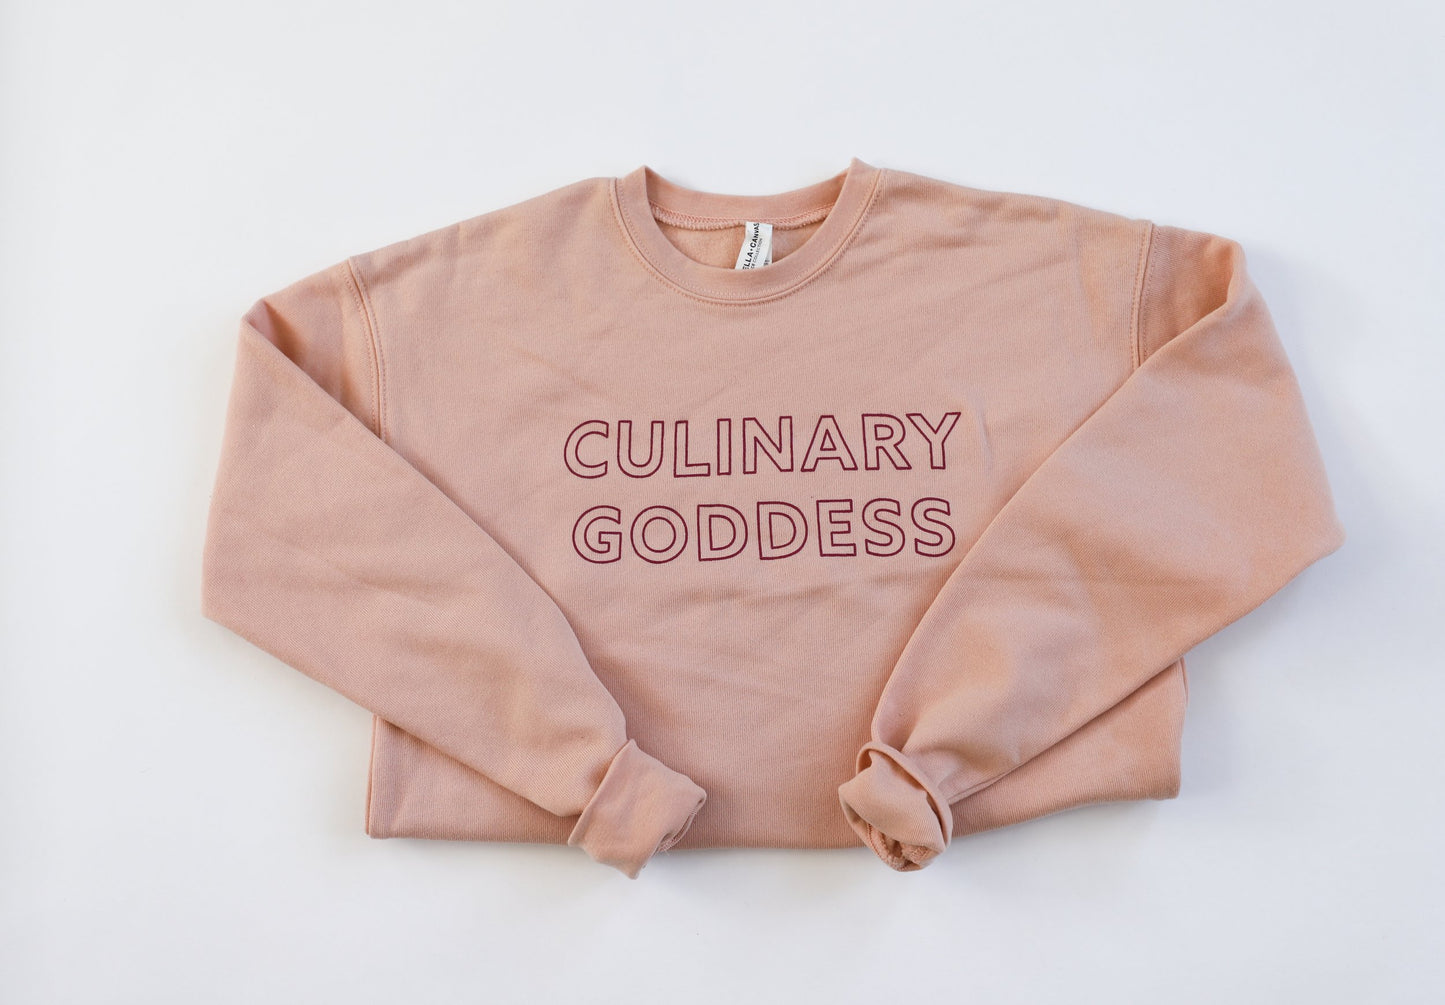 Peach colored crewneck sweatshirt with "Culinary Goddess" in pink block letters